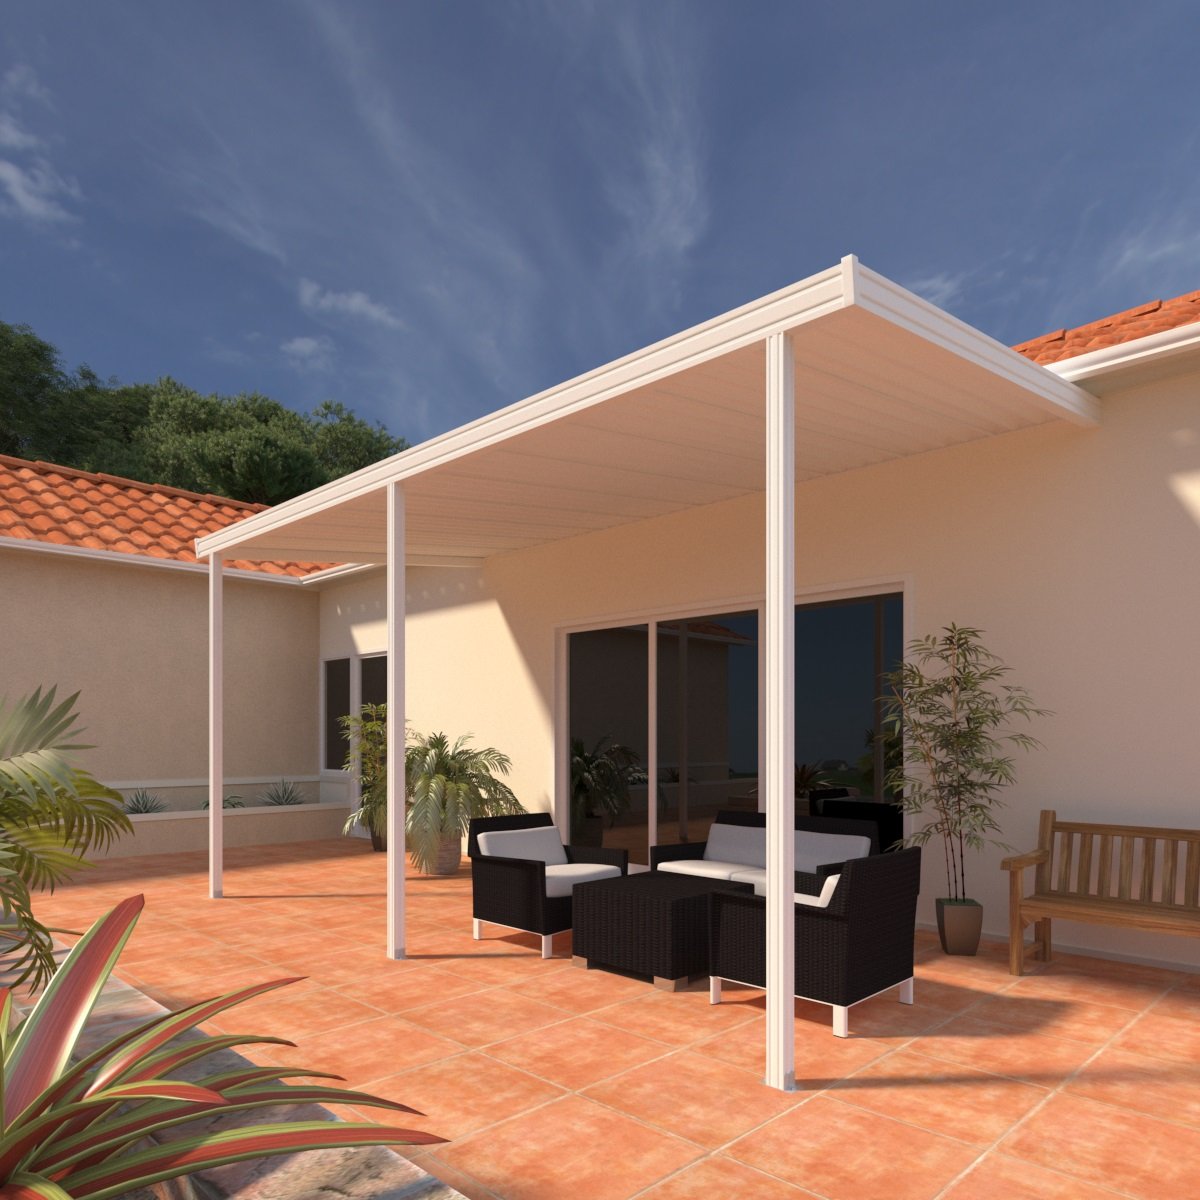 08 ft. Deep x 14 ft. Wide White Attached Aluminum Patio Cover -3 Posts - (20lb Low/Medium Snow Area)